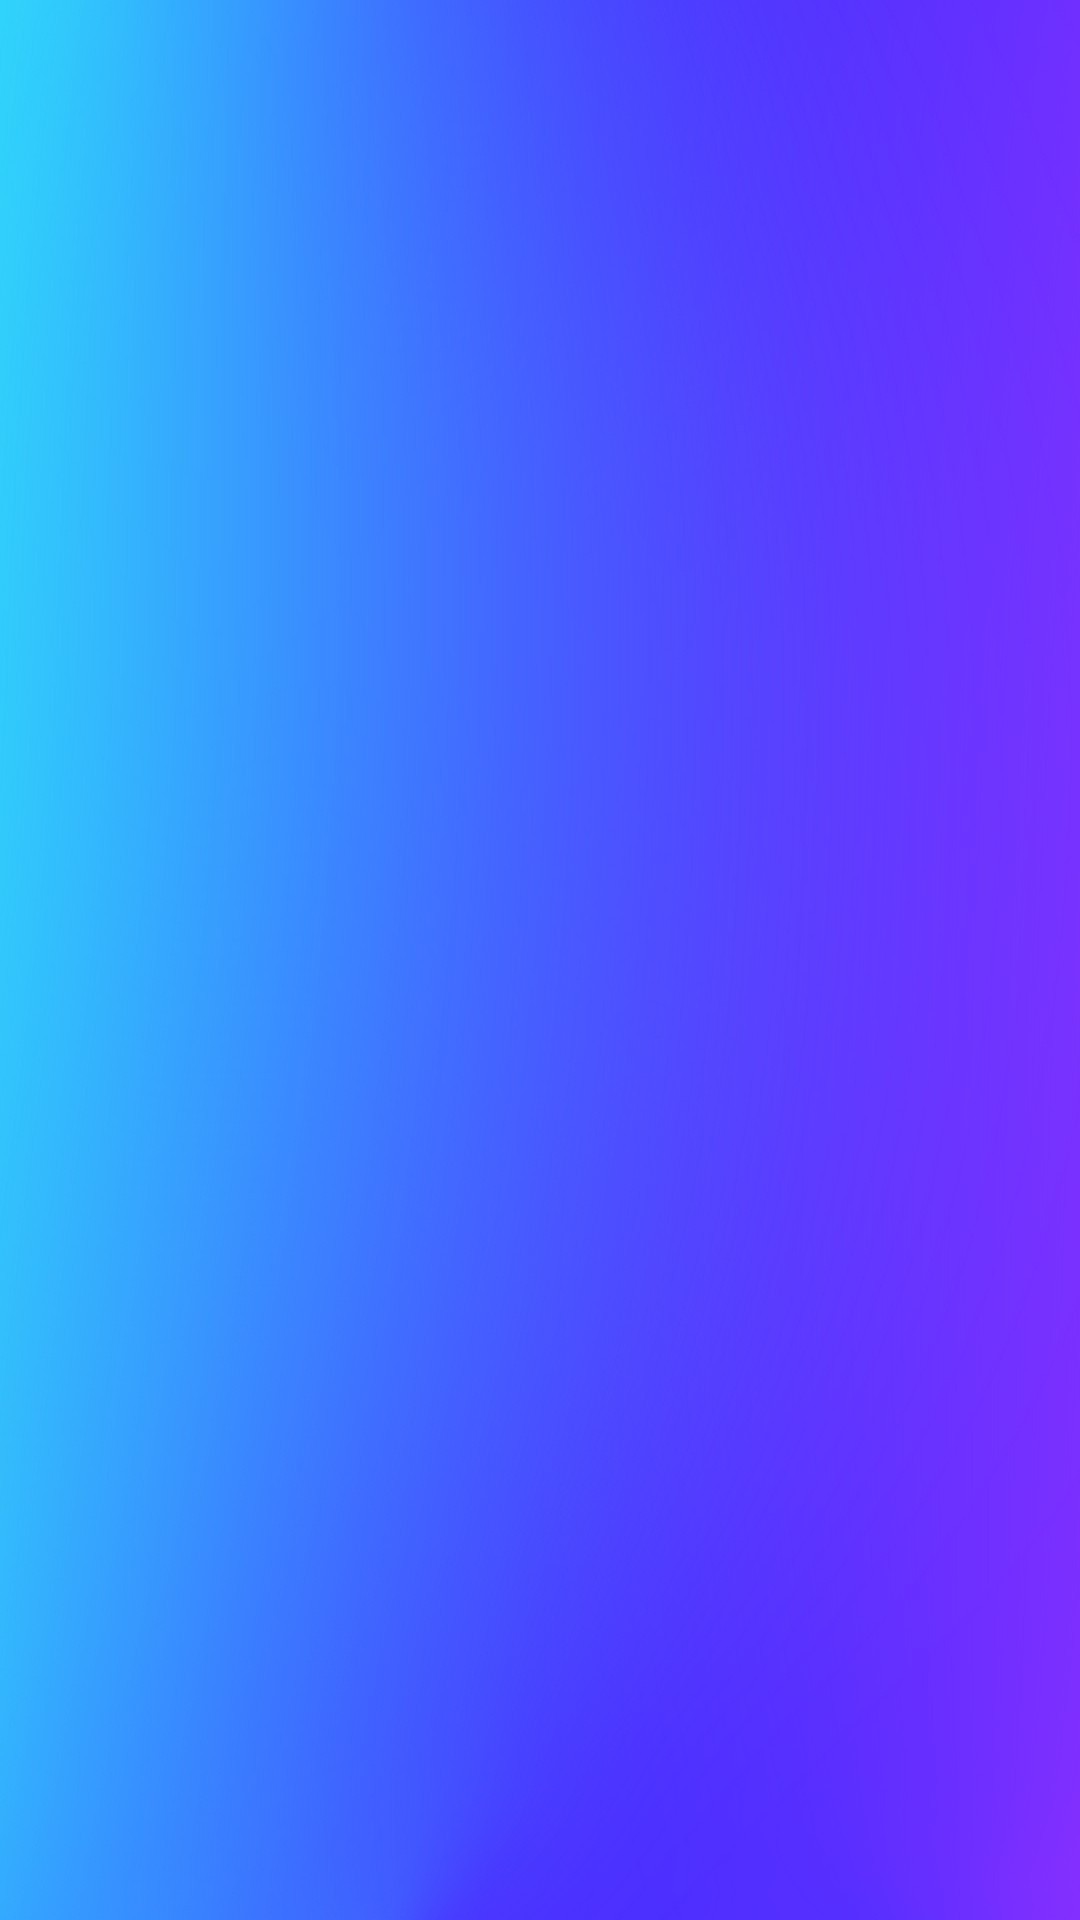 Gradient i Phones Wallpaper with high-resolution 1080x1920 pixel. Download all Mobile Wallpapers and Use them as wallpapers for your iPhone, Tablet, iPad, Android and other mobile devices